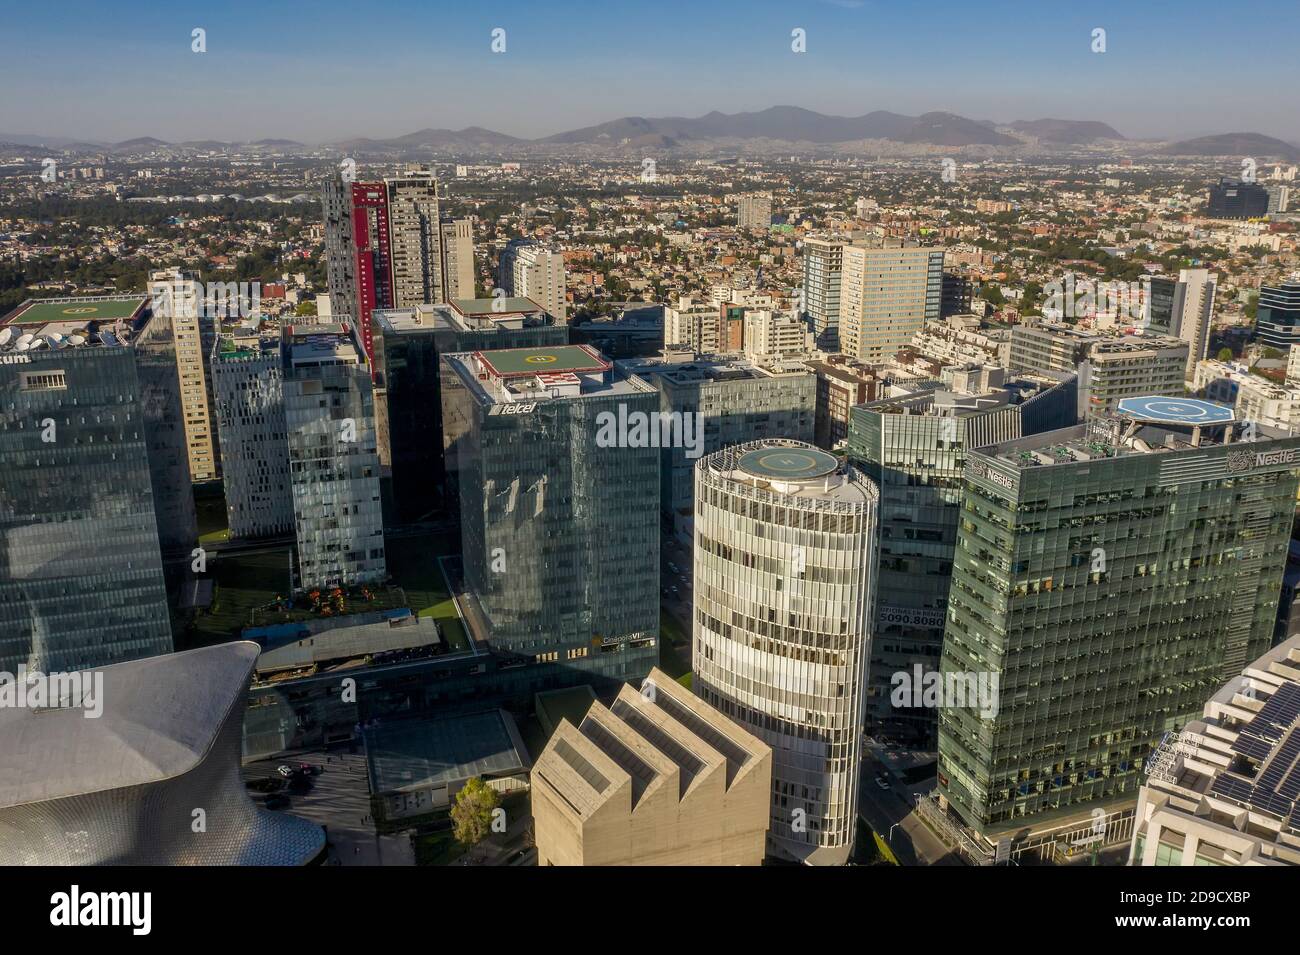 Helicopter pads on top of buildings in Mexico City, Mexico Stock Photo